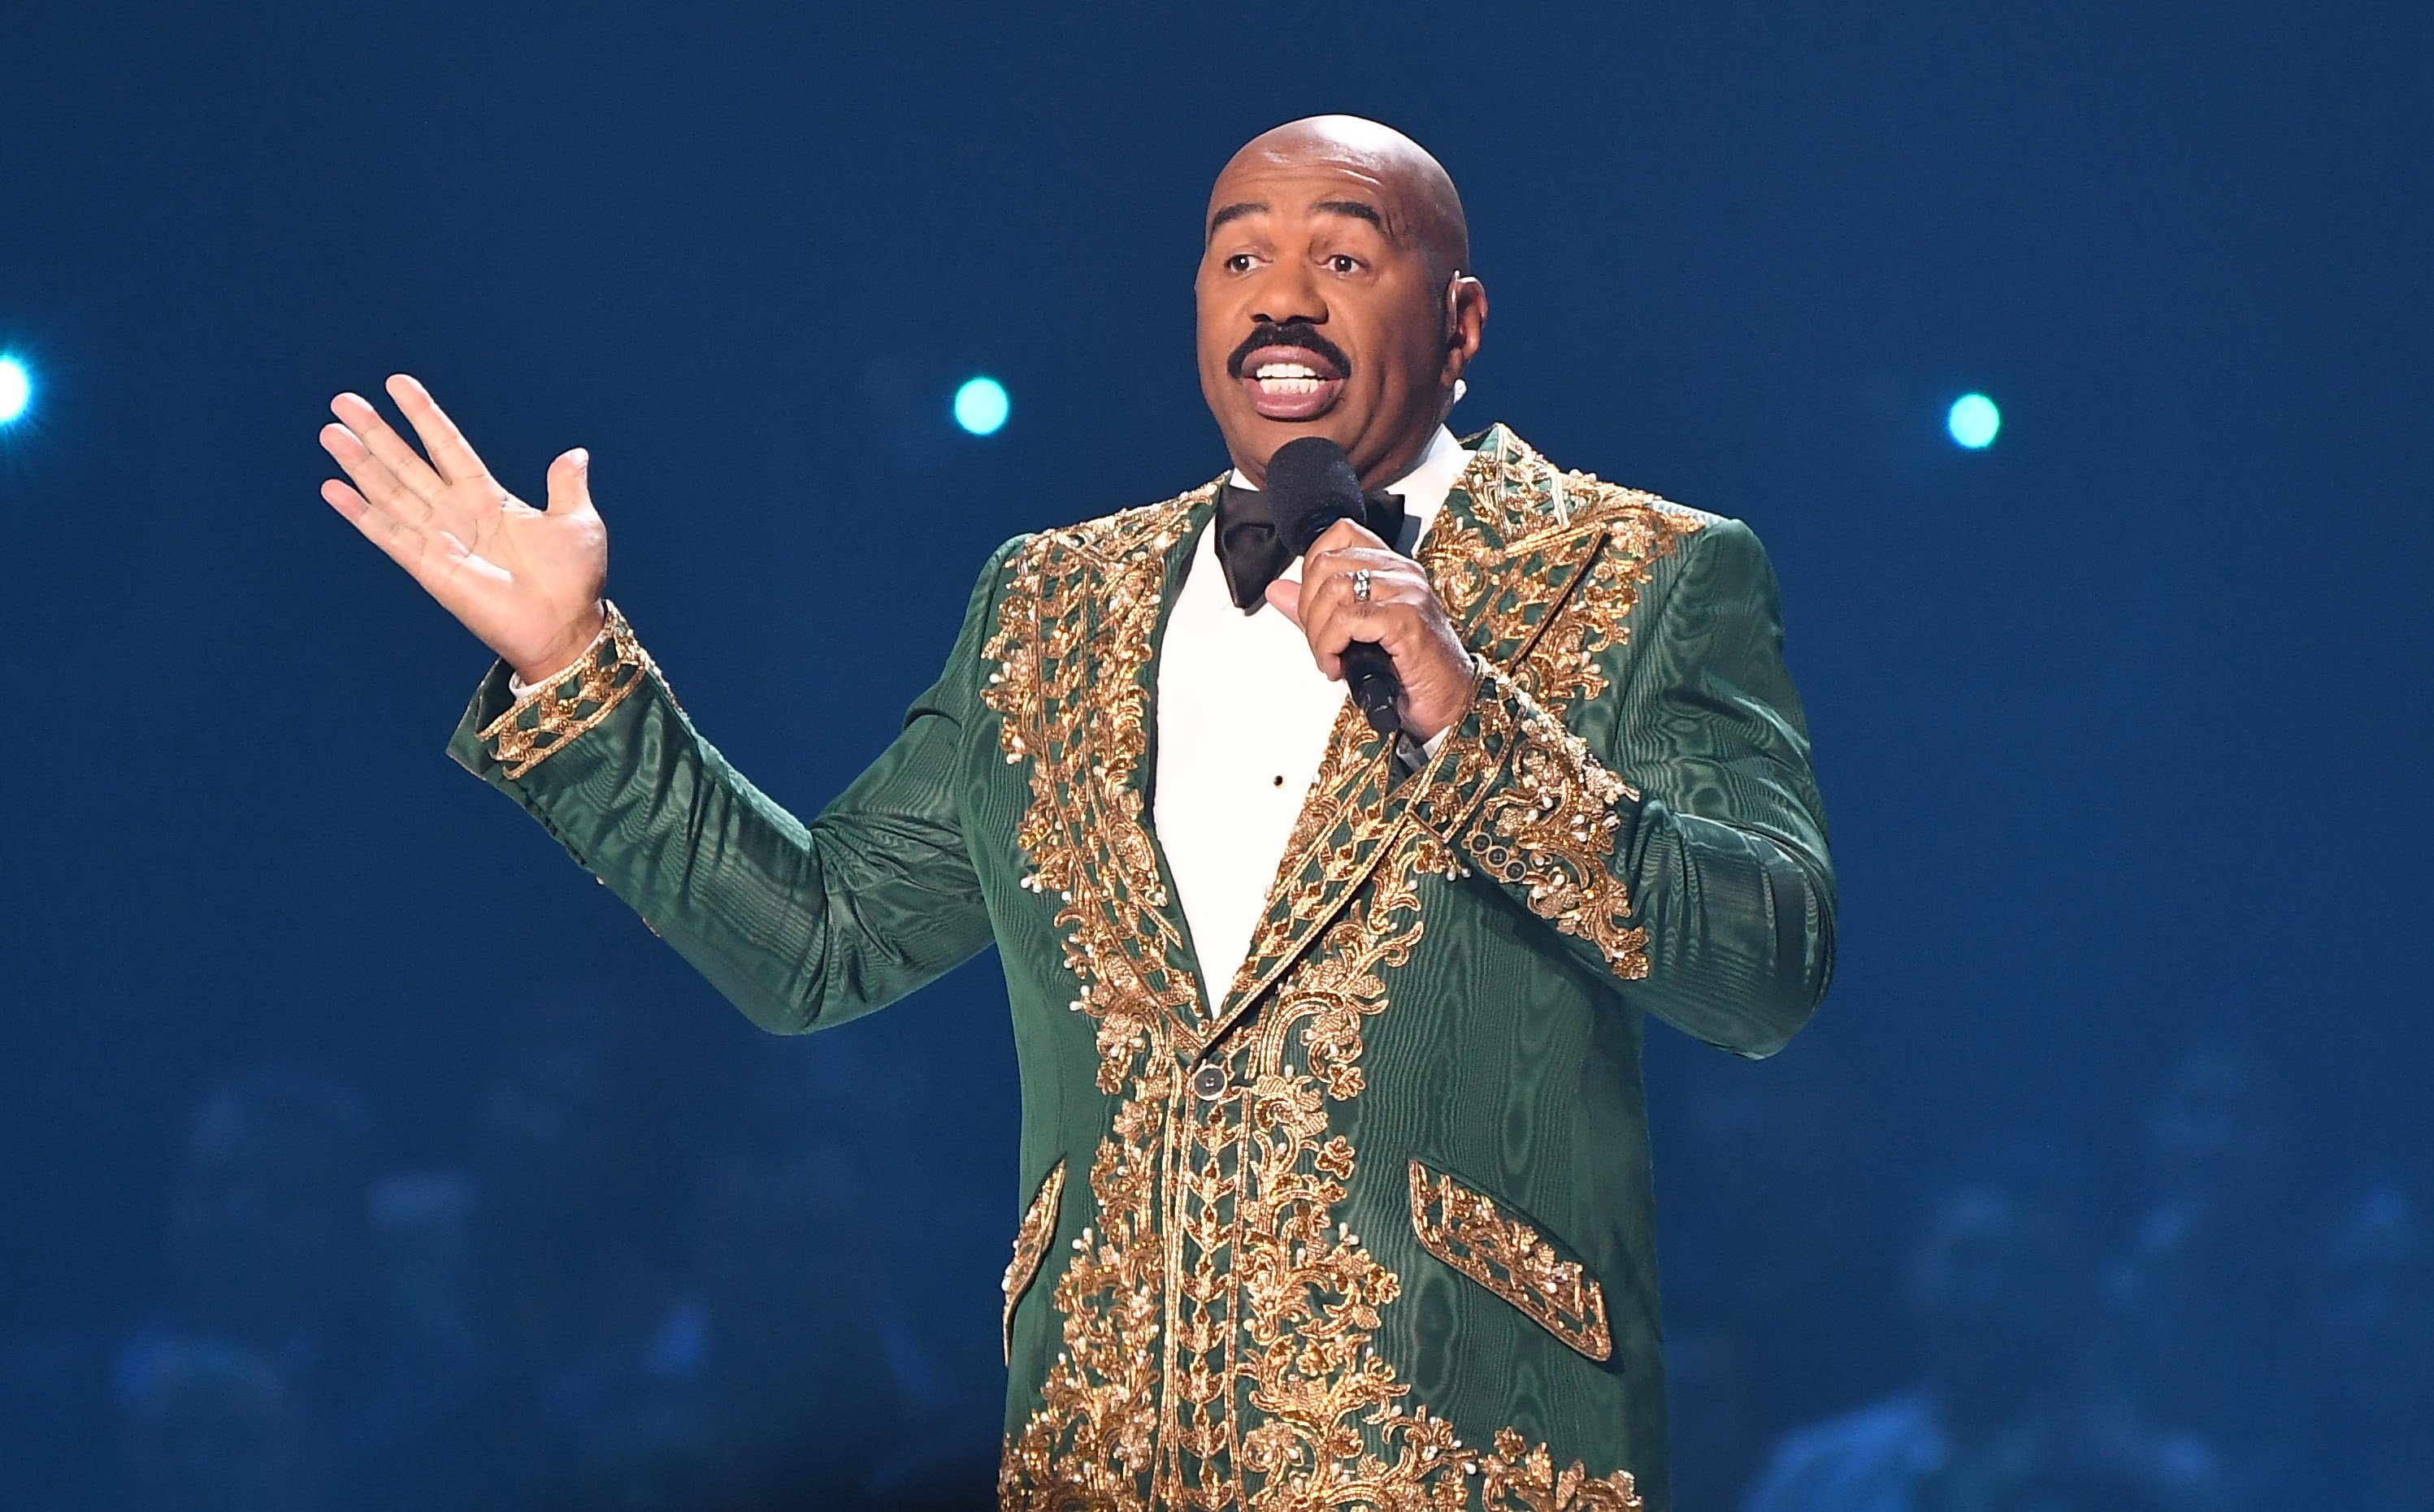 Steve Harvey speaking at the 2019 Miss Universe Pageant at Tyler Perry Studios on December 08, 2019 in Atlanta, Georgia.|Source: Getty Images